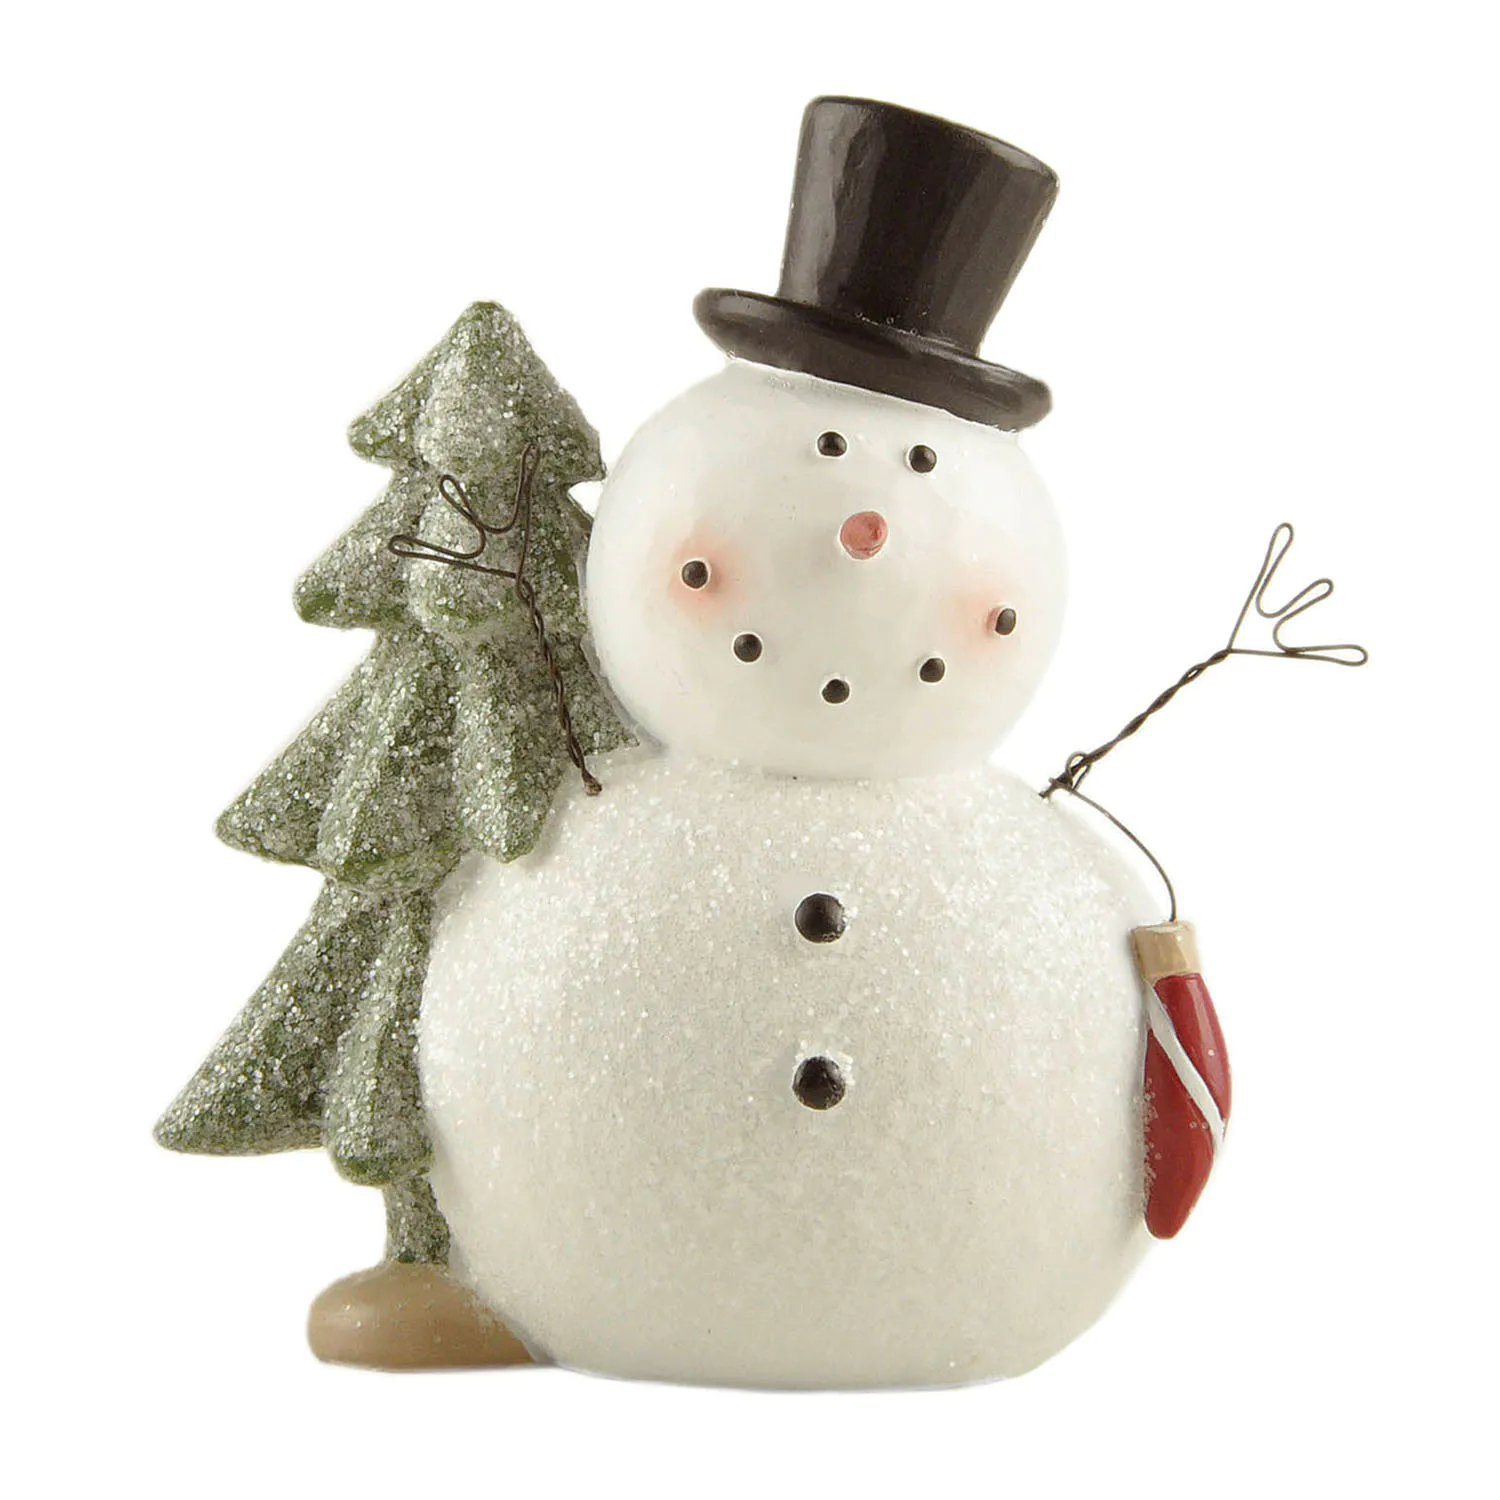 New Arrival Resin Handcrafted Snowman Figurine Elegant Gliter Snowman w Hat & Tree Statue for Home Decor 238-13933